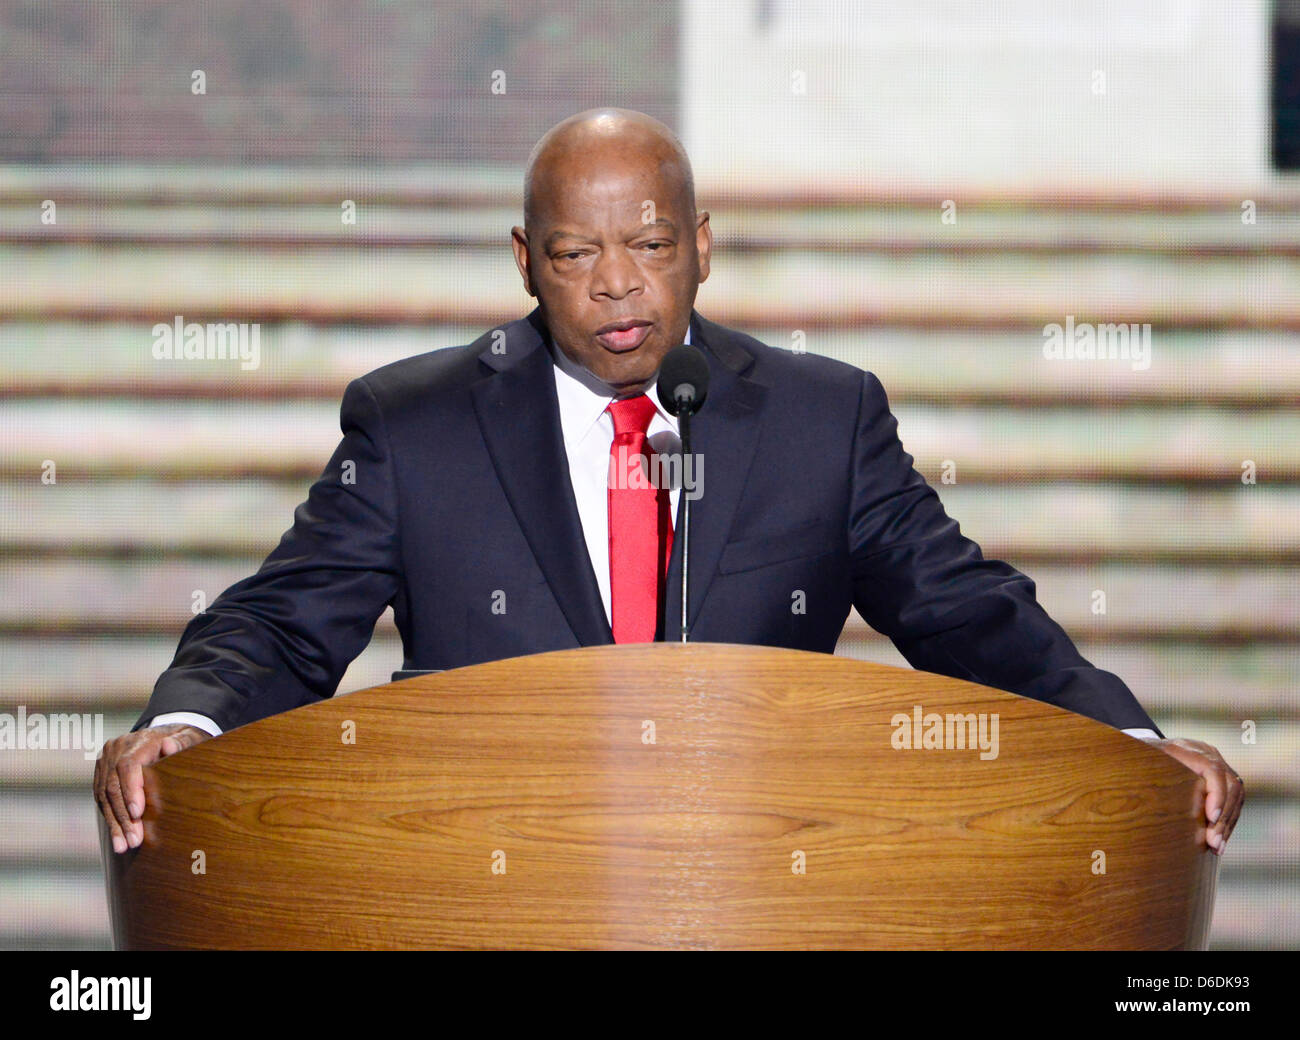 United States Representative John Lewis (Democrat of Georgia) makes remarks at the 2012 Democratic National Convention in Charlotte, North Carolina on Thursday, September 6, 2012. .Credit: Ron Sachs / CNP.(RESTRICTION: NO New York or New Jersey Newspapers or newspapers within a 75 mile radius of New York City) Stock Photo